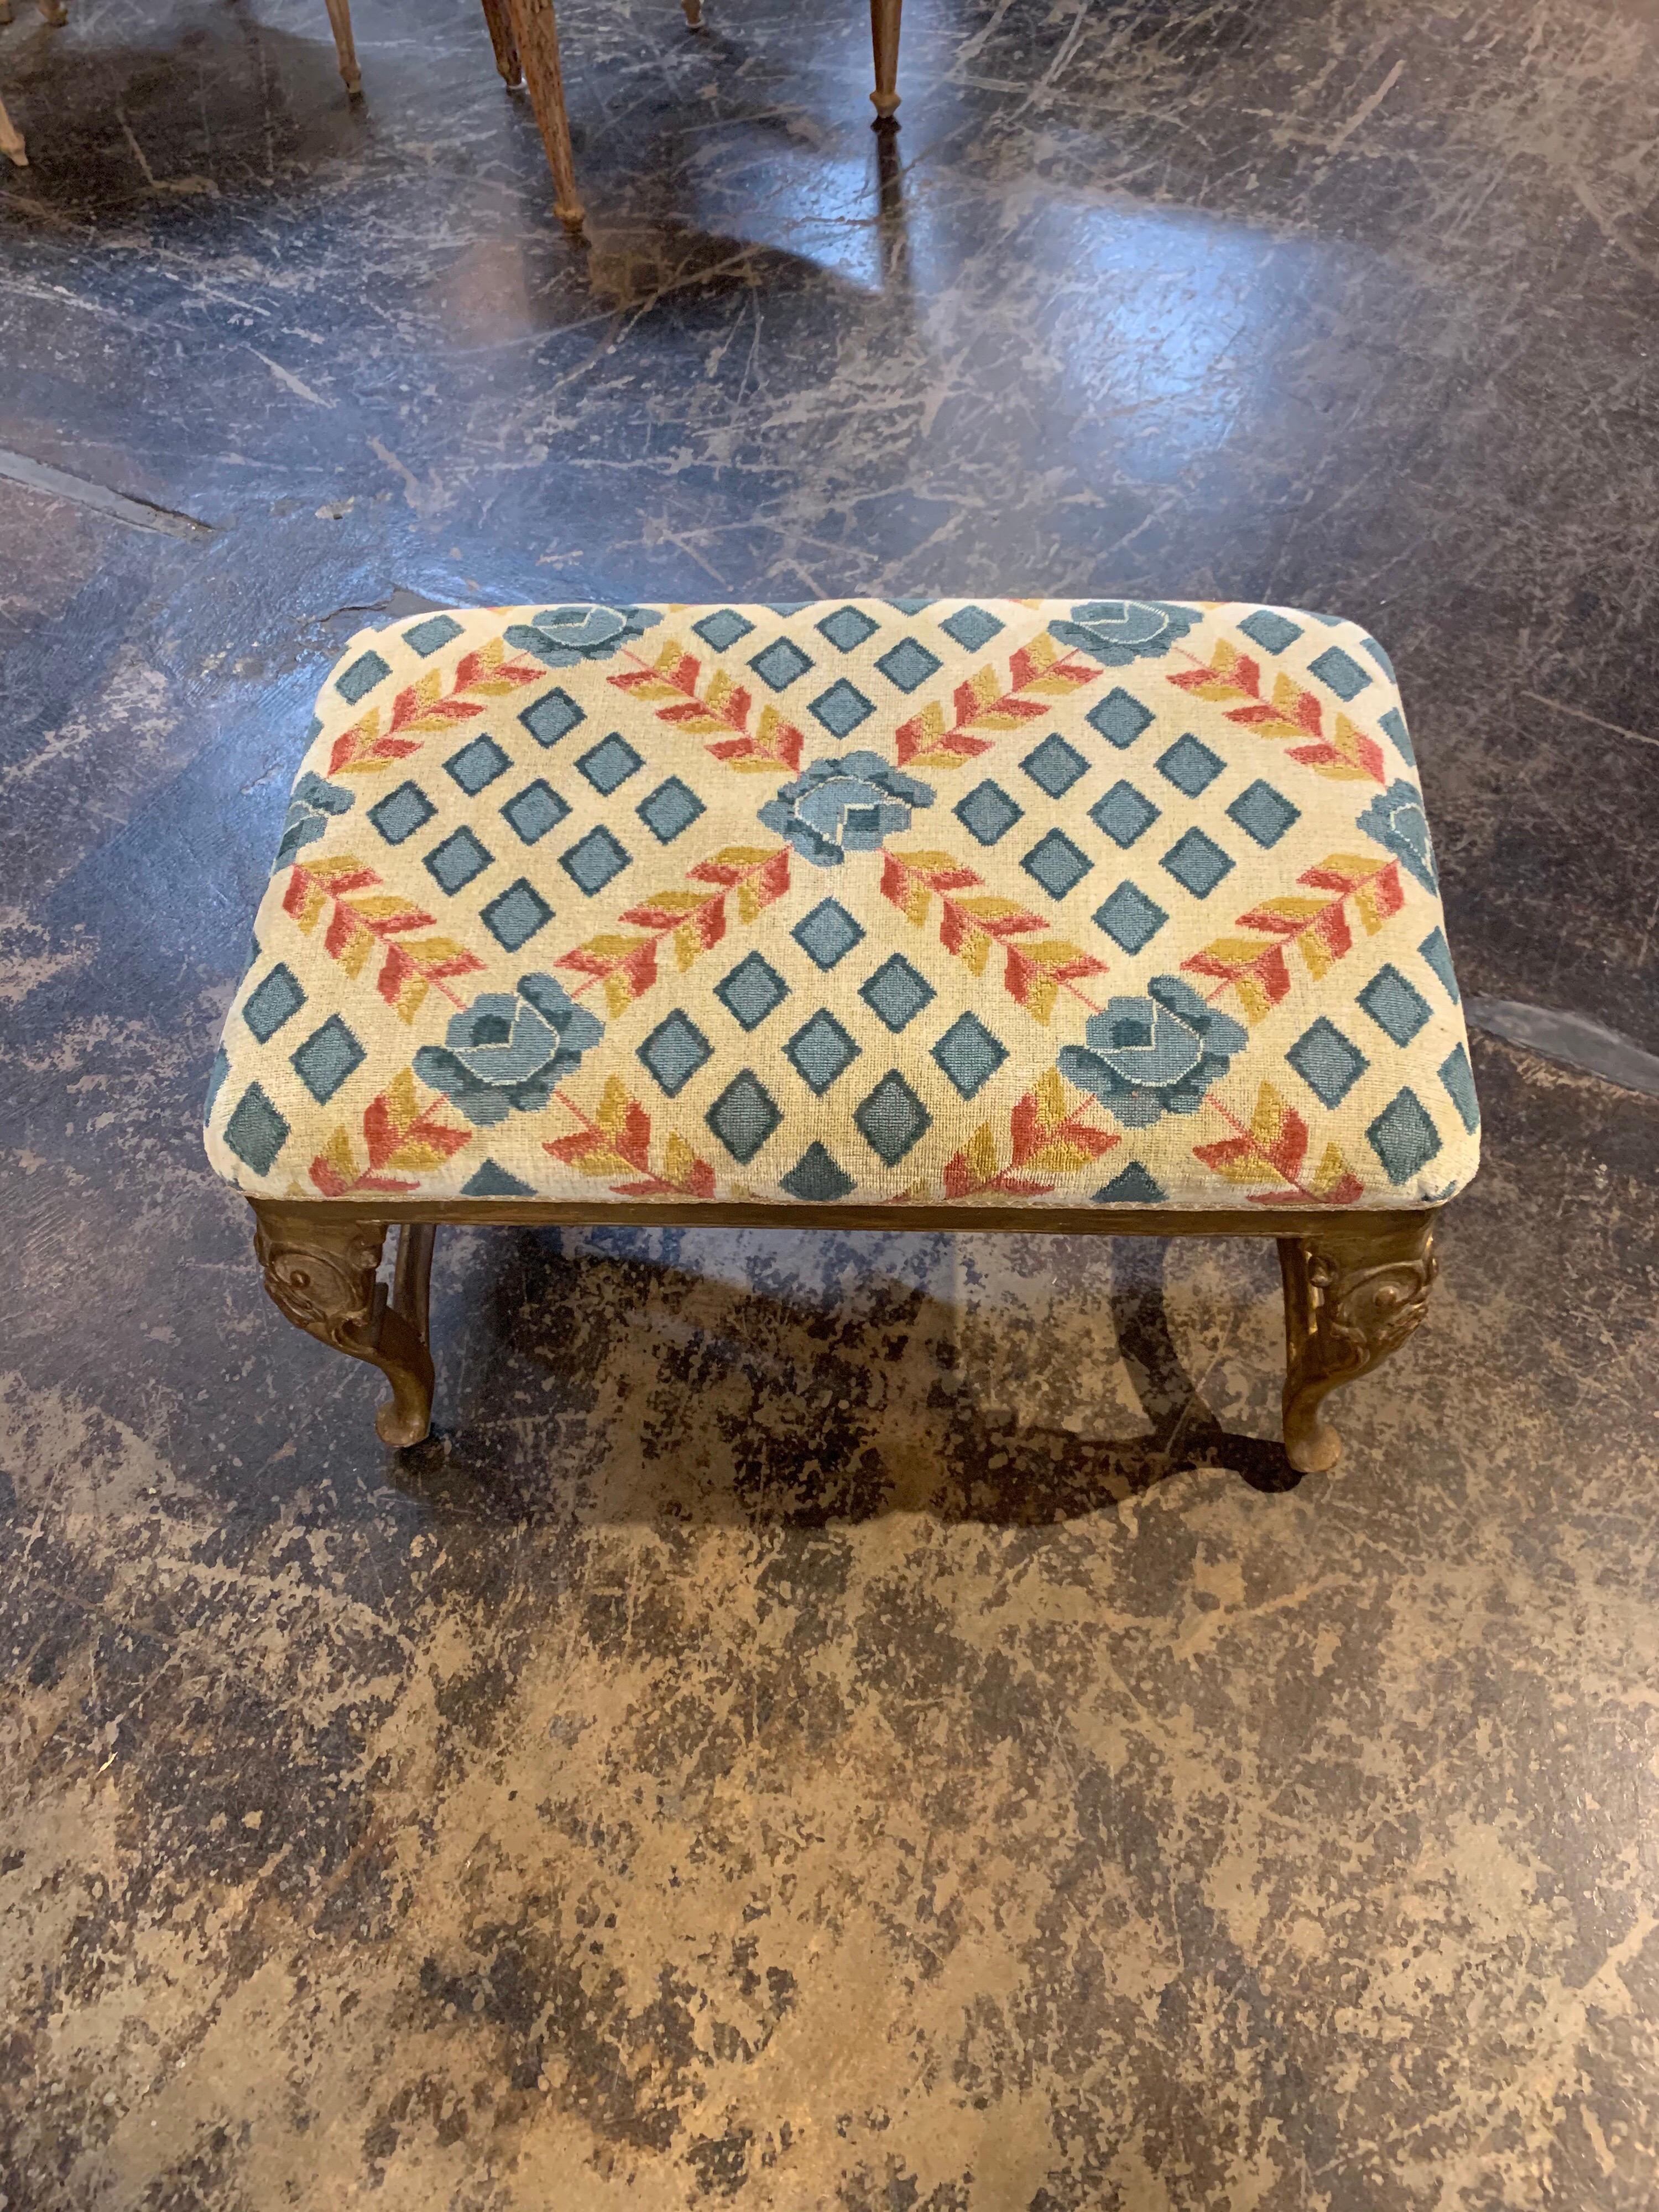 Beautiful 19th century Italian carved and giltwood bench. The piece is upholstered in a lovely fabric of light blue, orange and gold. Very nice carving and gilt on the base as well. So pretty!